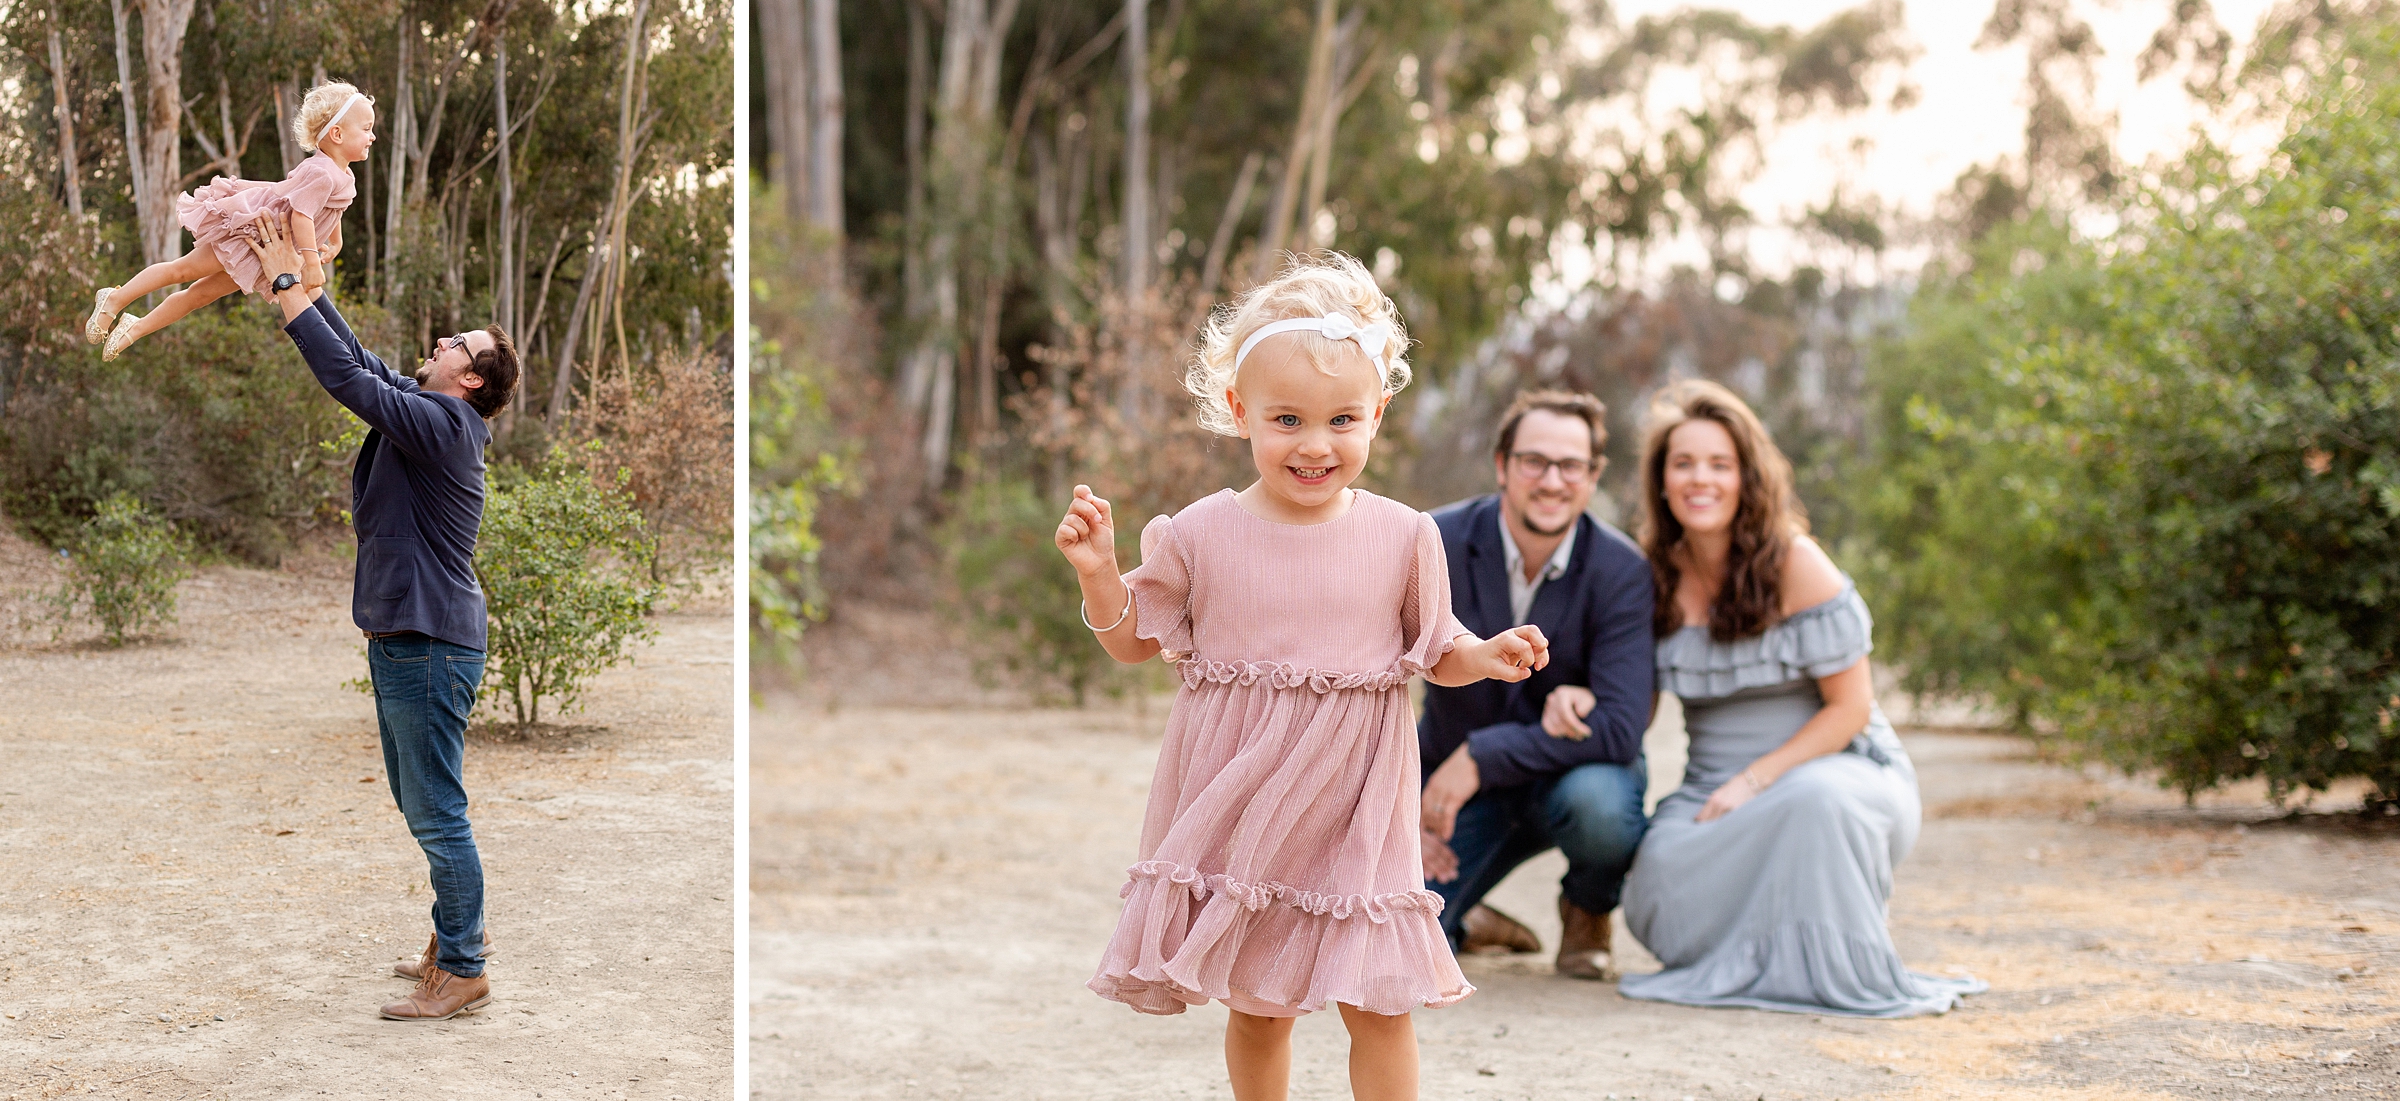 natural laid back family photography in Los Angeles